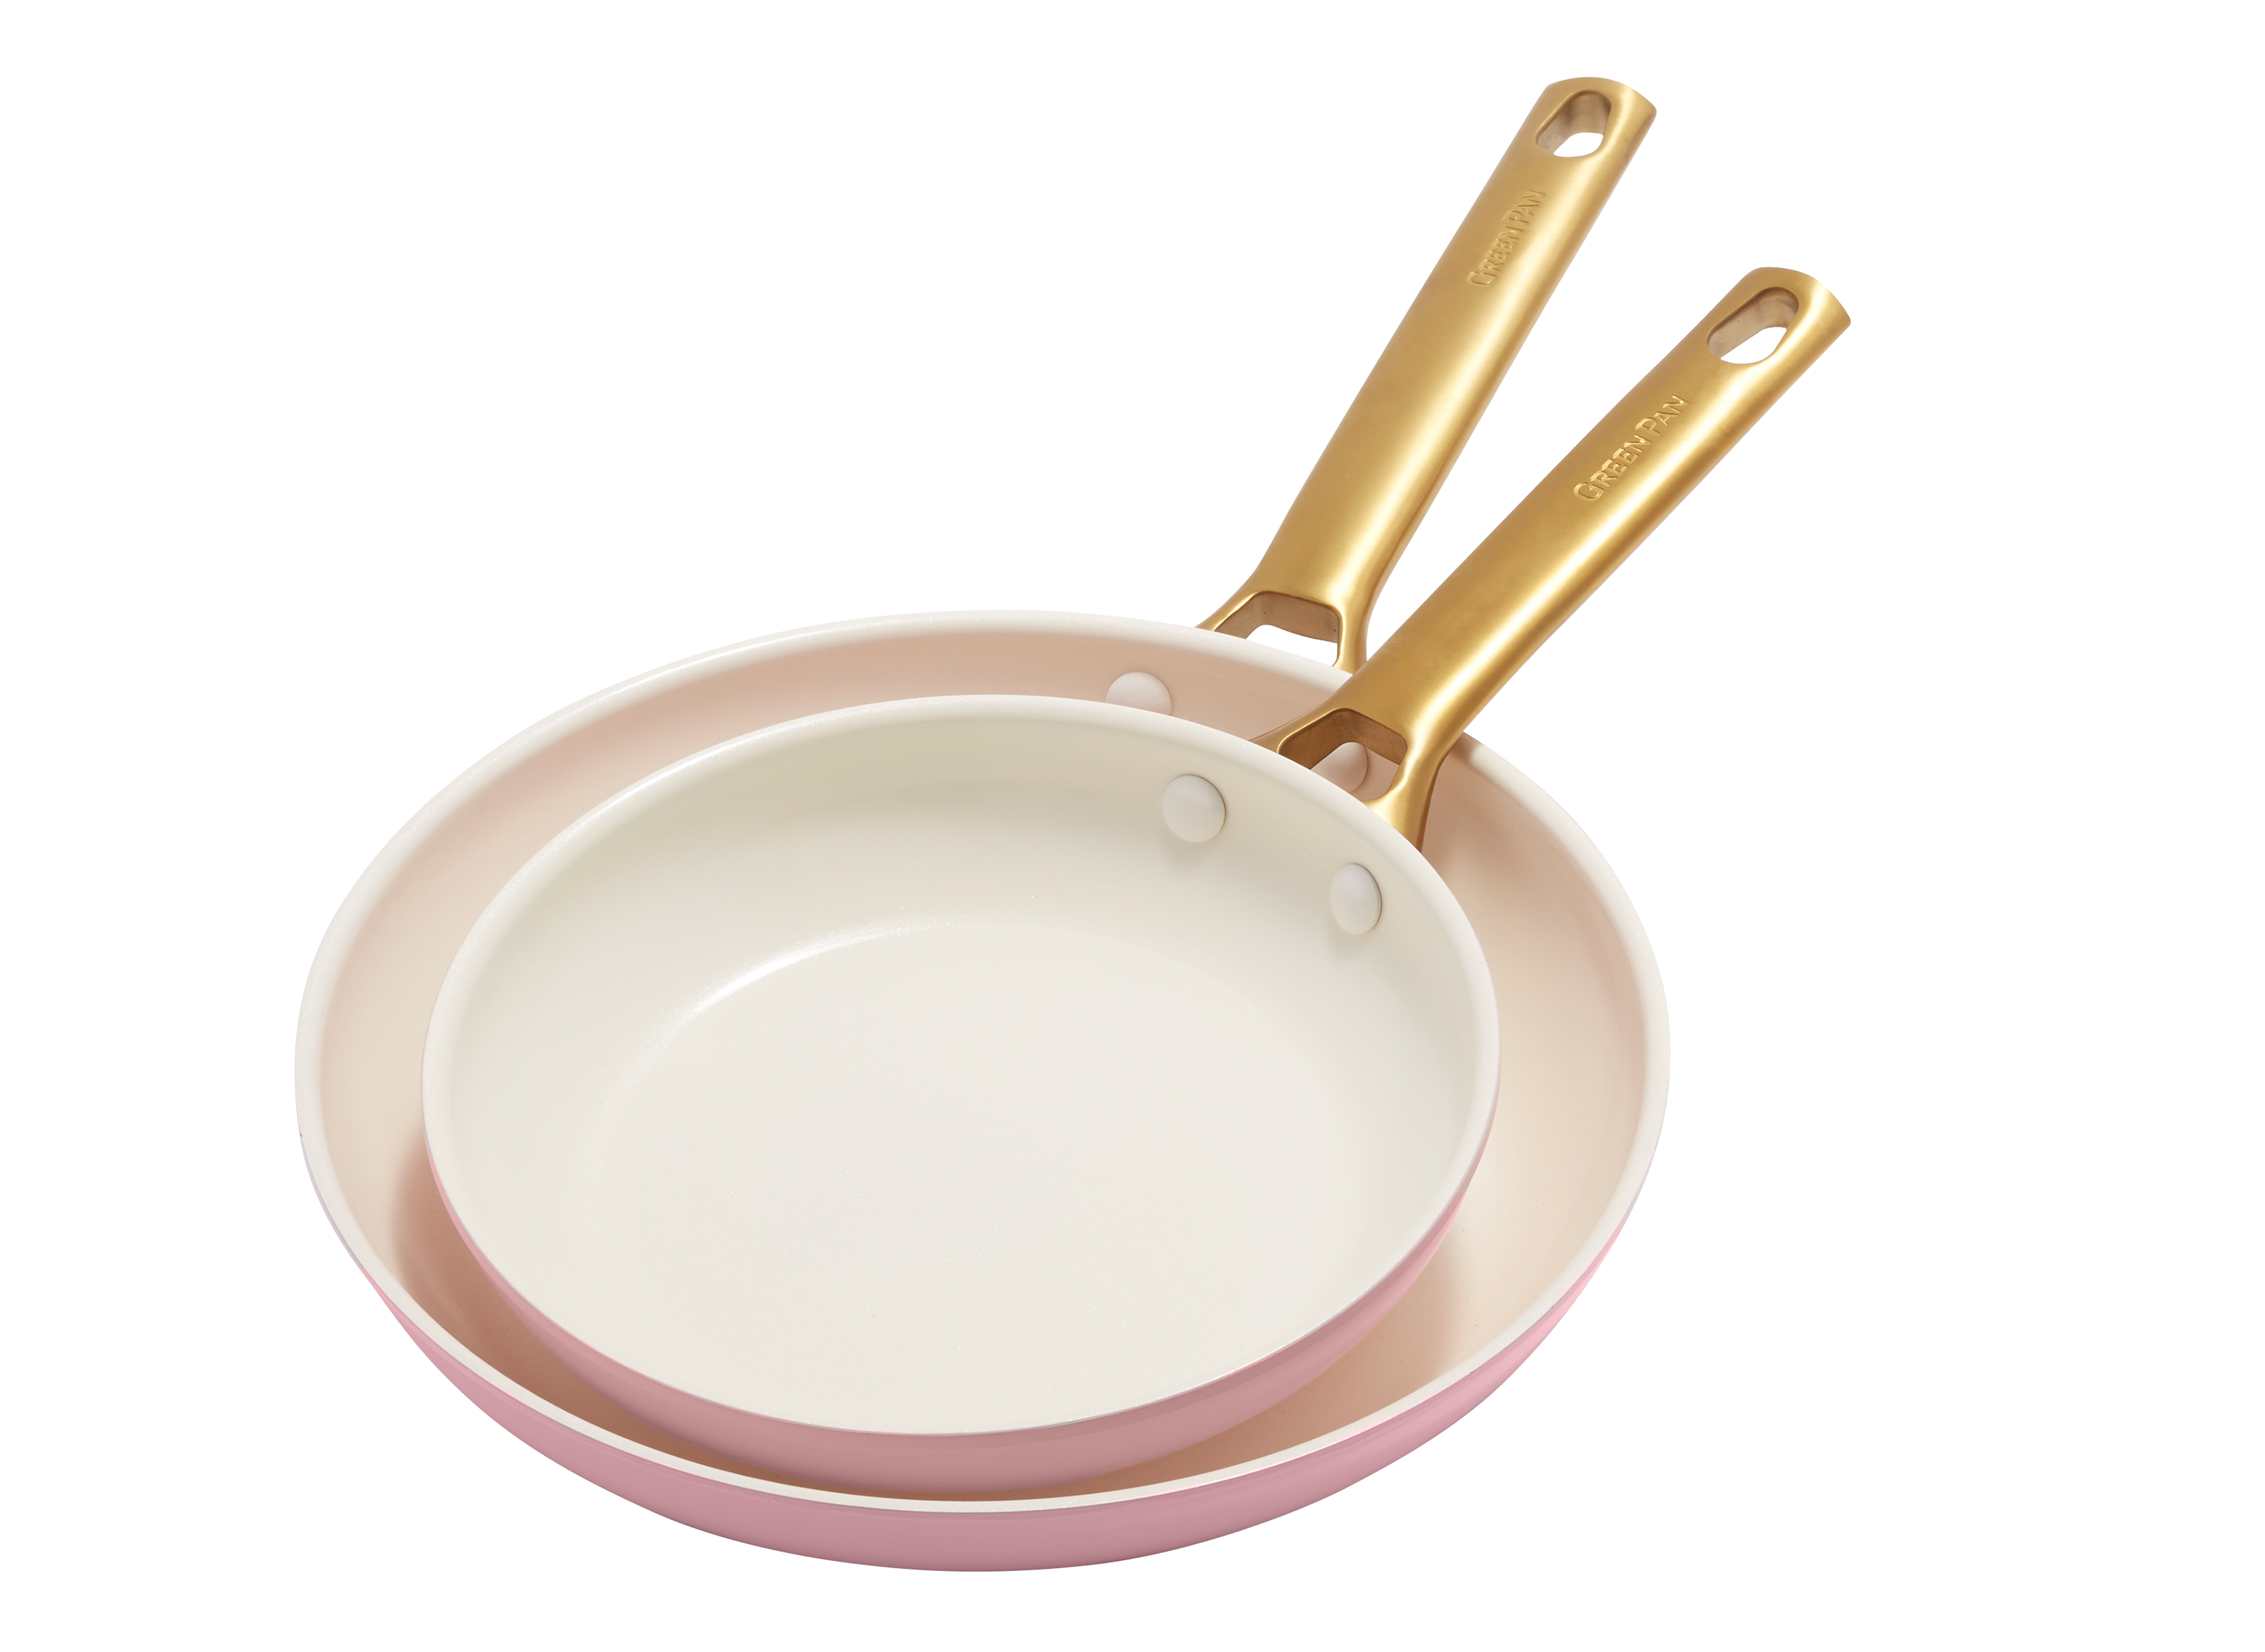 https://crdms.images.consumerreports.org/prod/products/cr/models/404673-frying-pans-nonstick-greenpan-padova-reserve-10023377.png